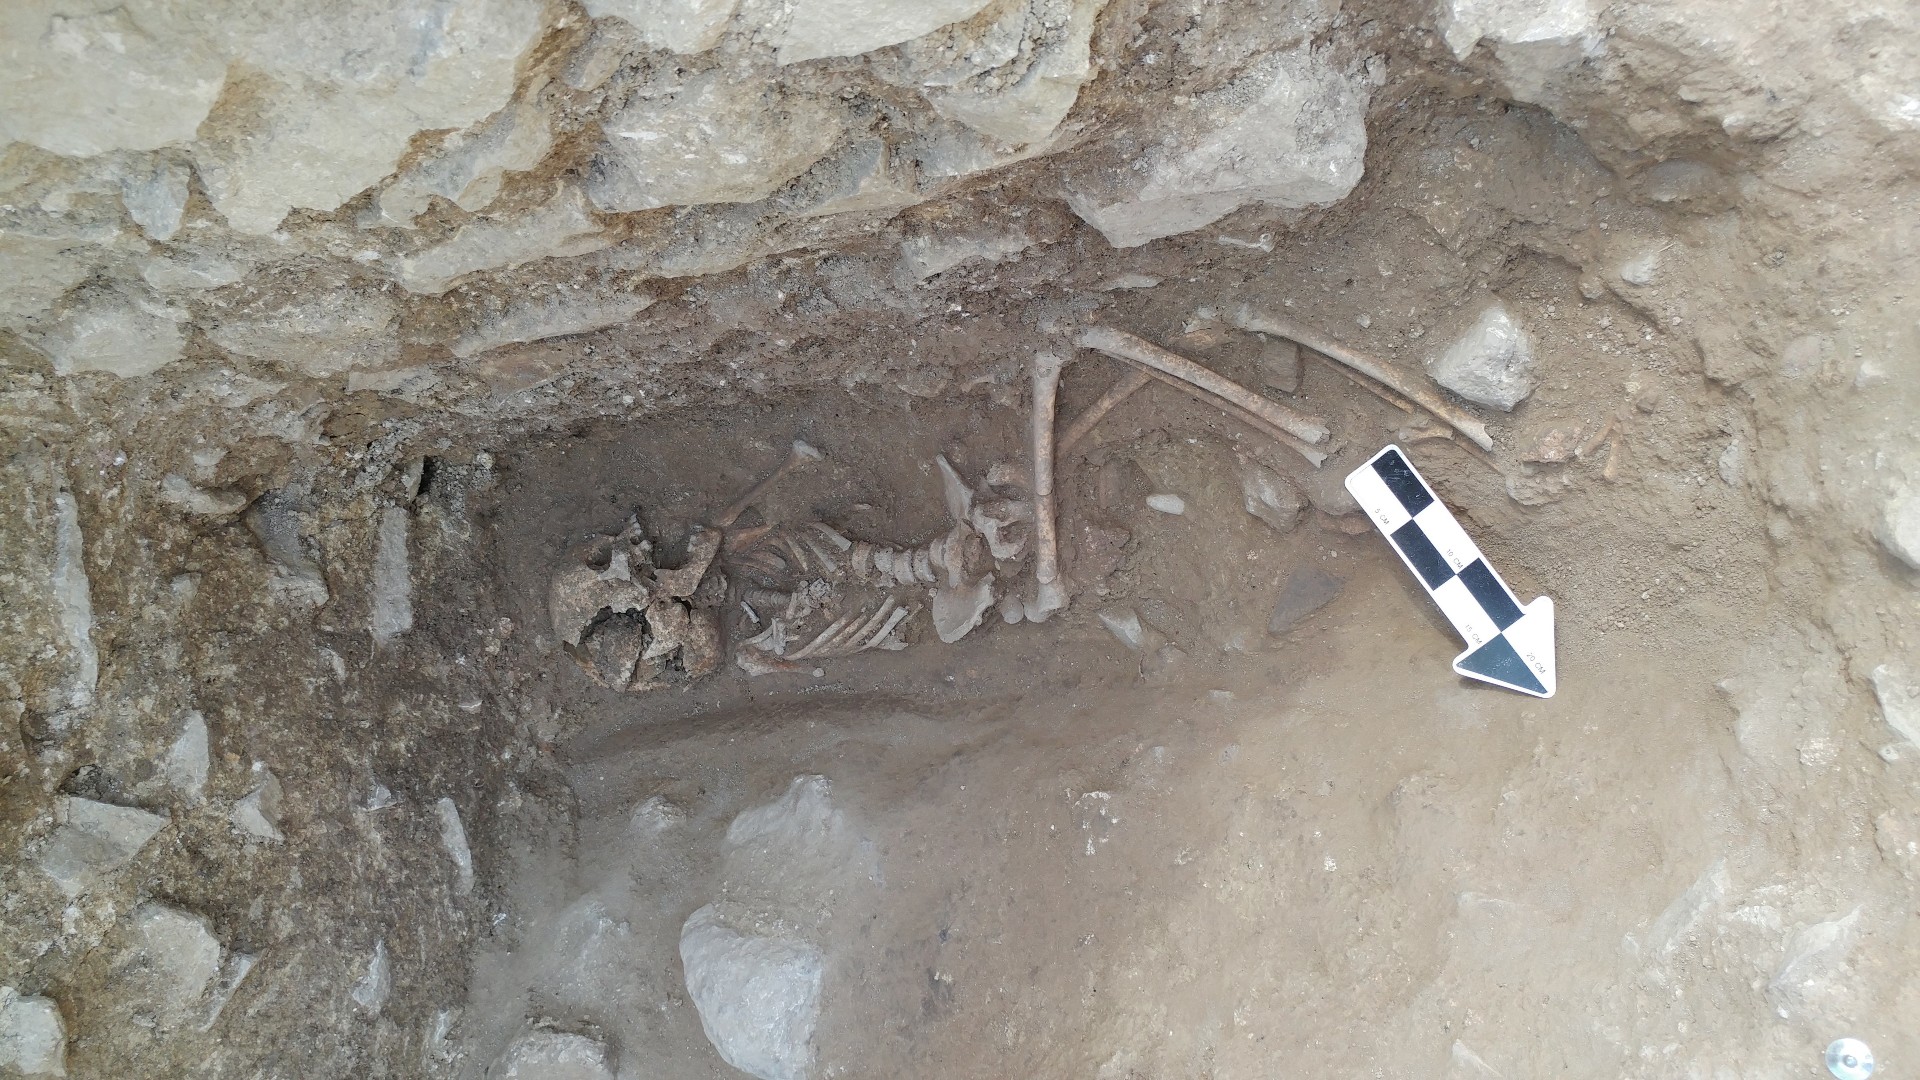 One of the burials found in the 1,600-year-old cemetery. It is a human skeleton laid on its side.